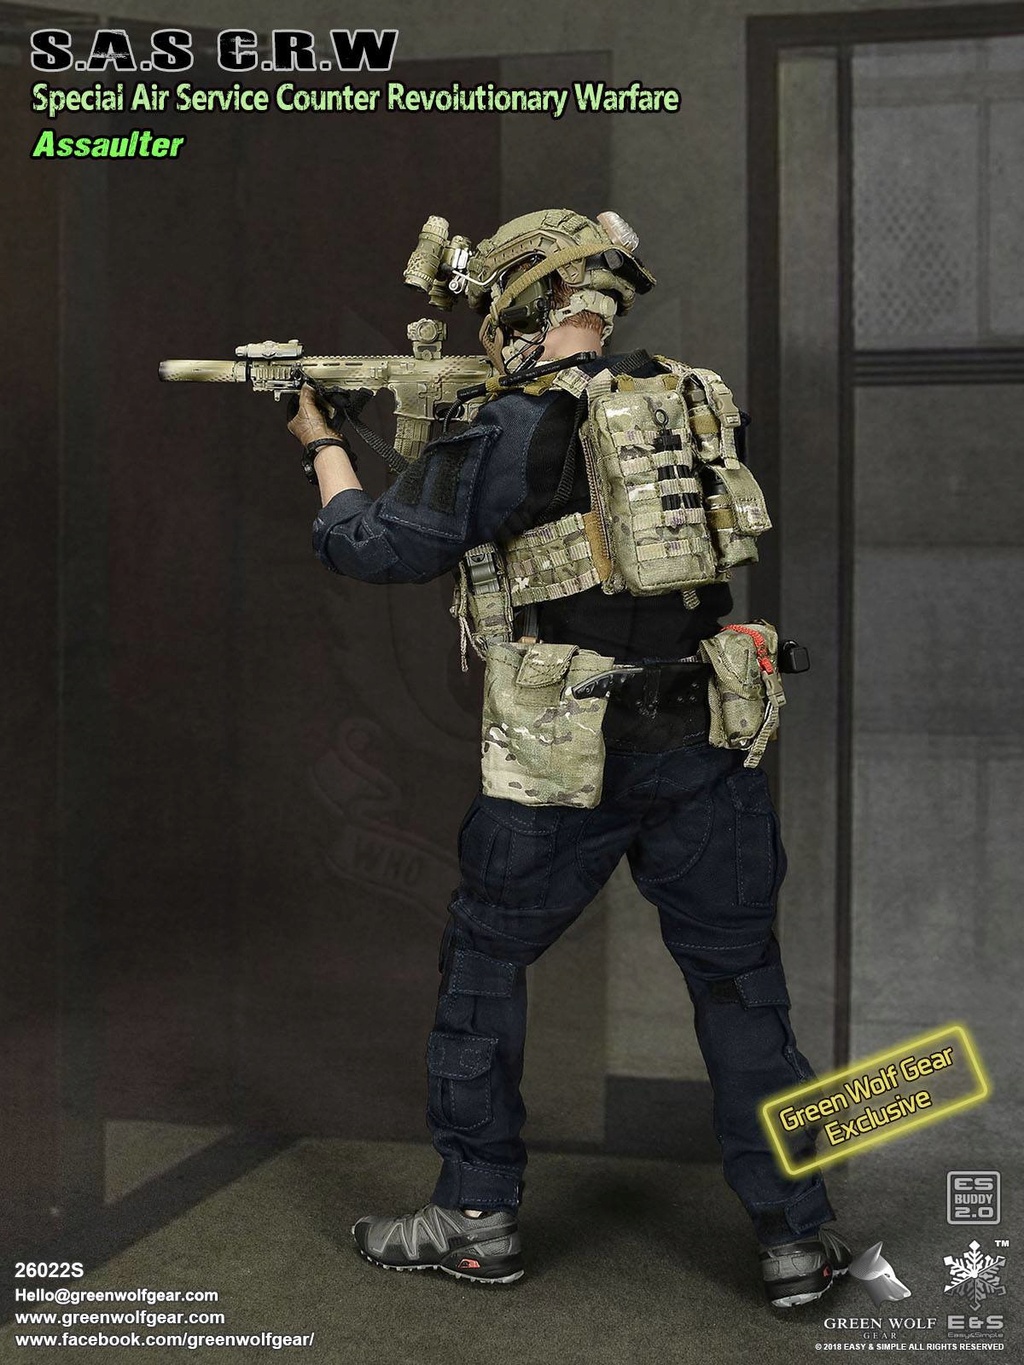 SAS - NEW PRODUCT: Easy & Simple SAS (Special Air Service) CRW (Counter Revolutionary Warfare)  Assaulter Exclusive Figure 715